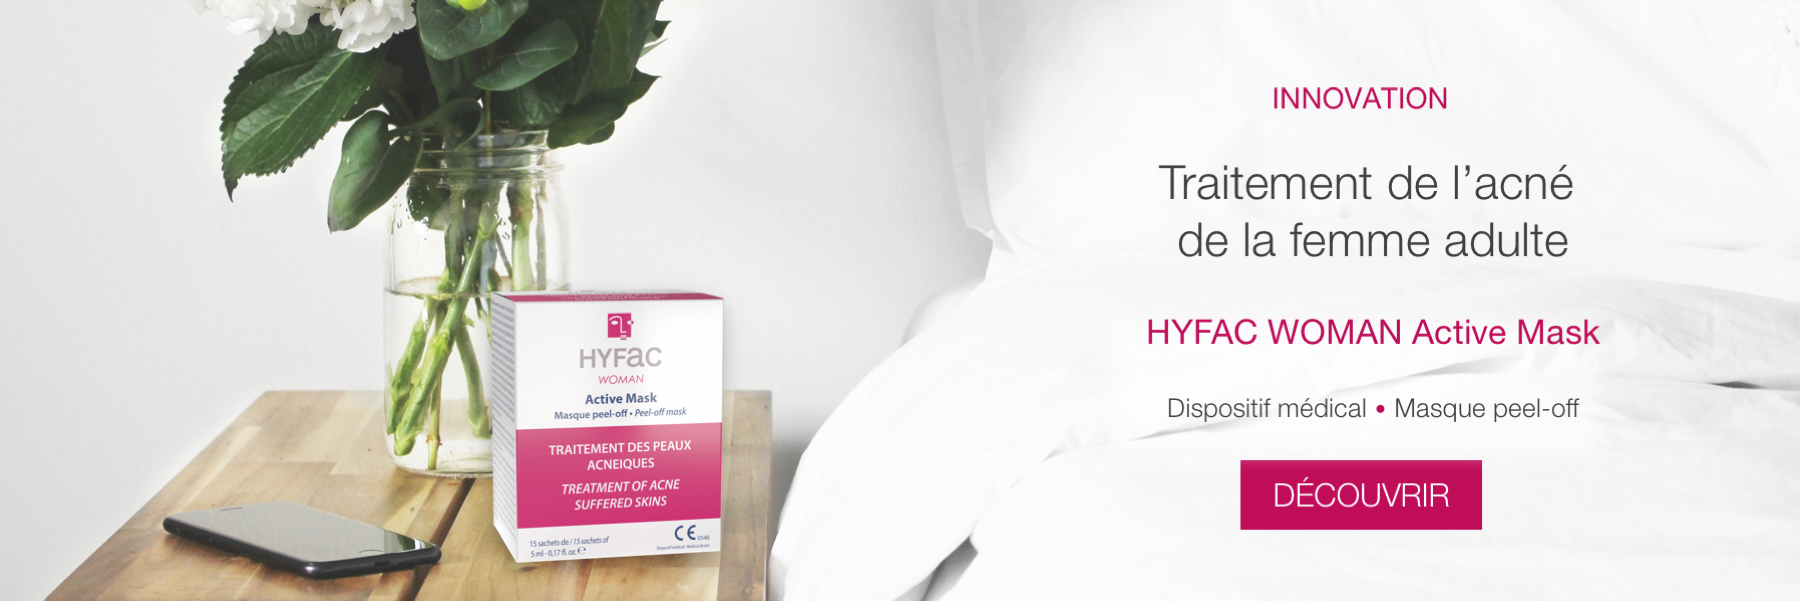 HYFAC-WOMAN-Active-Mask-treatment-acne-woman-adult-mask